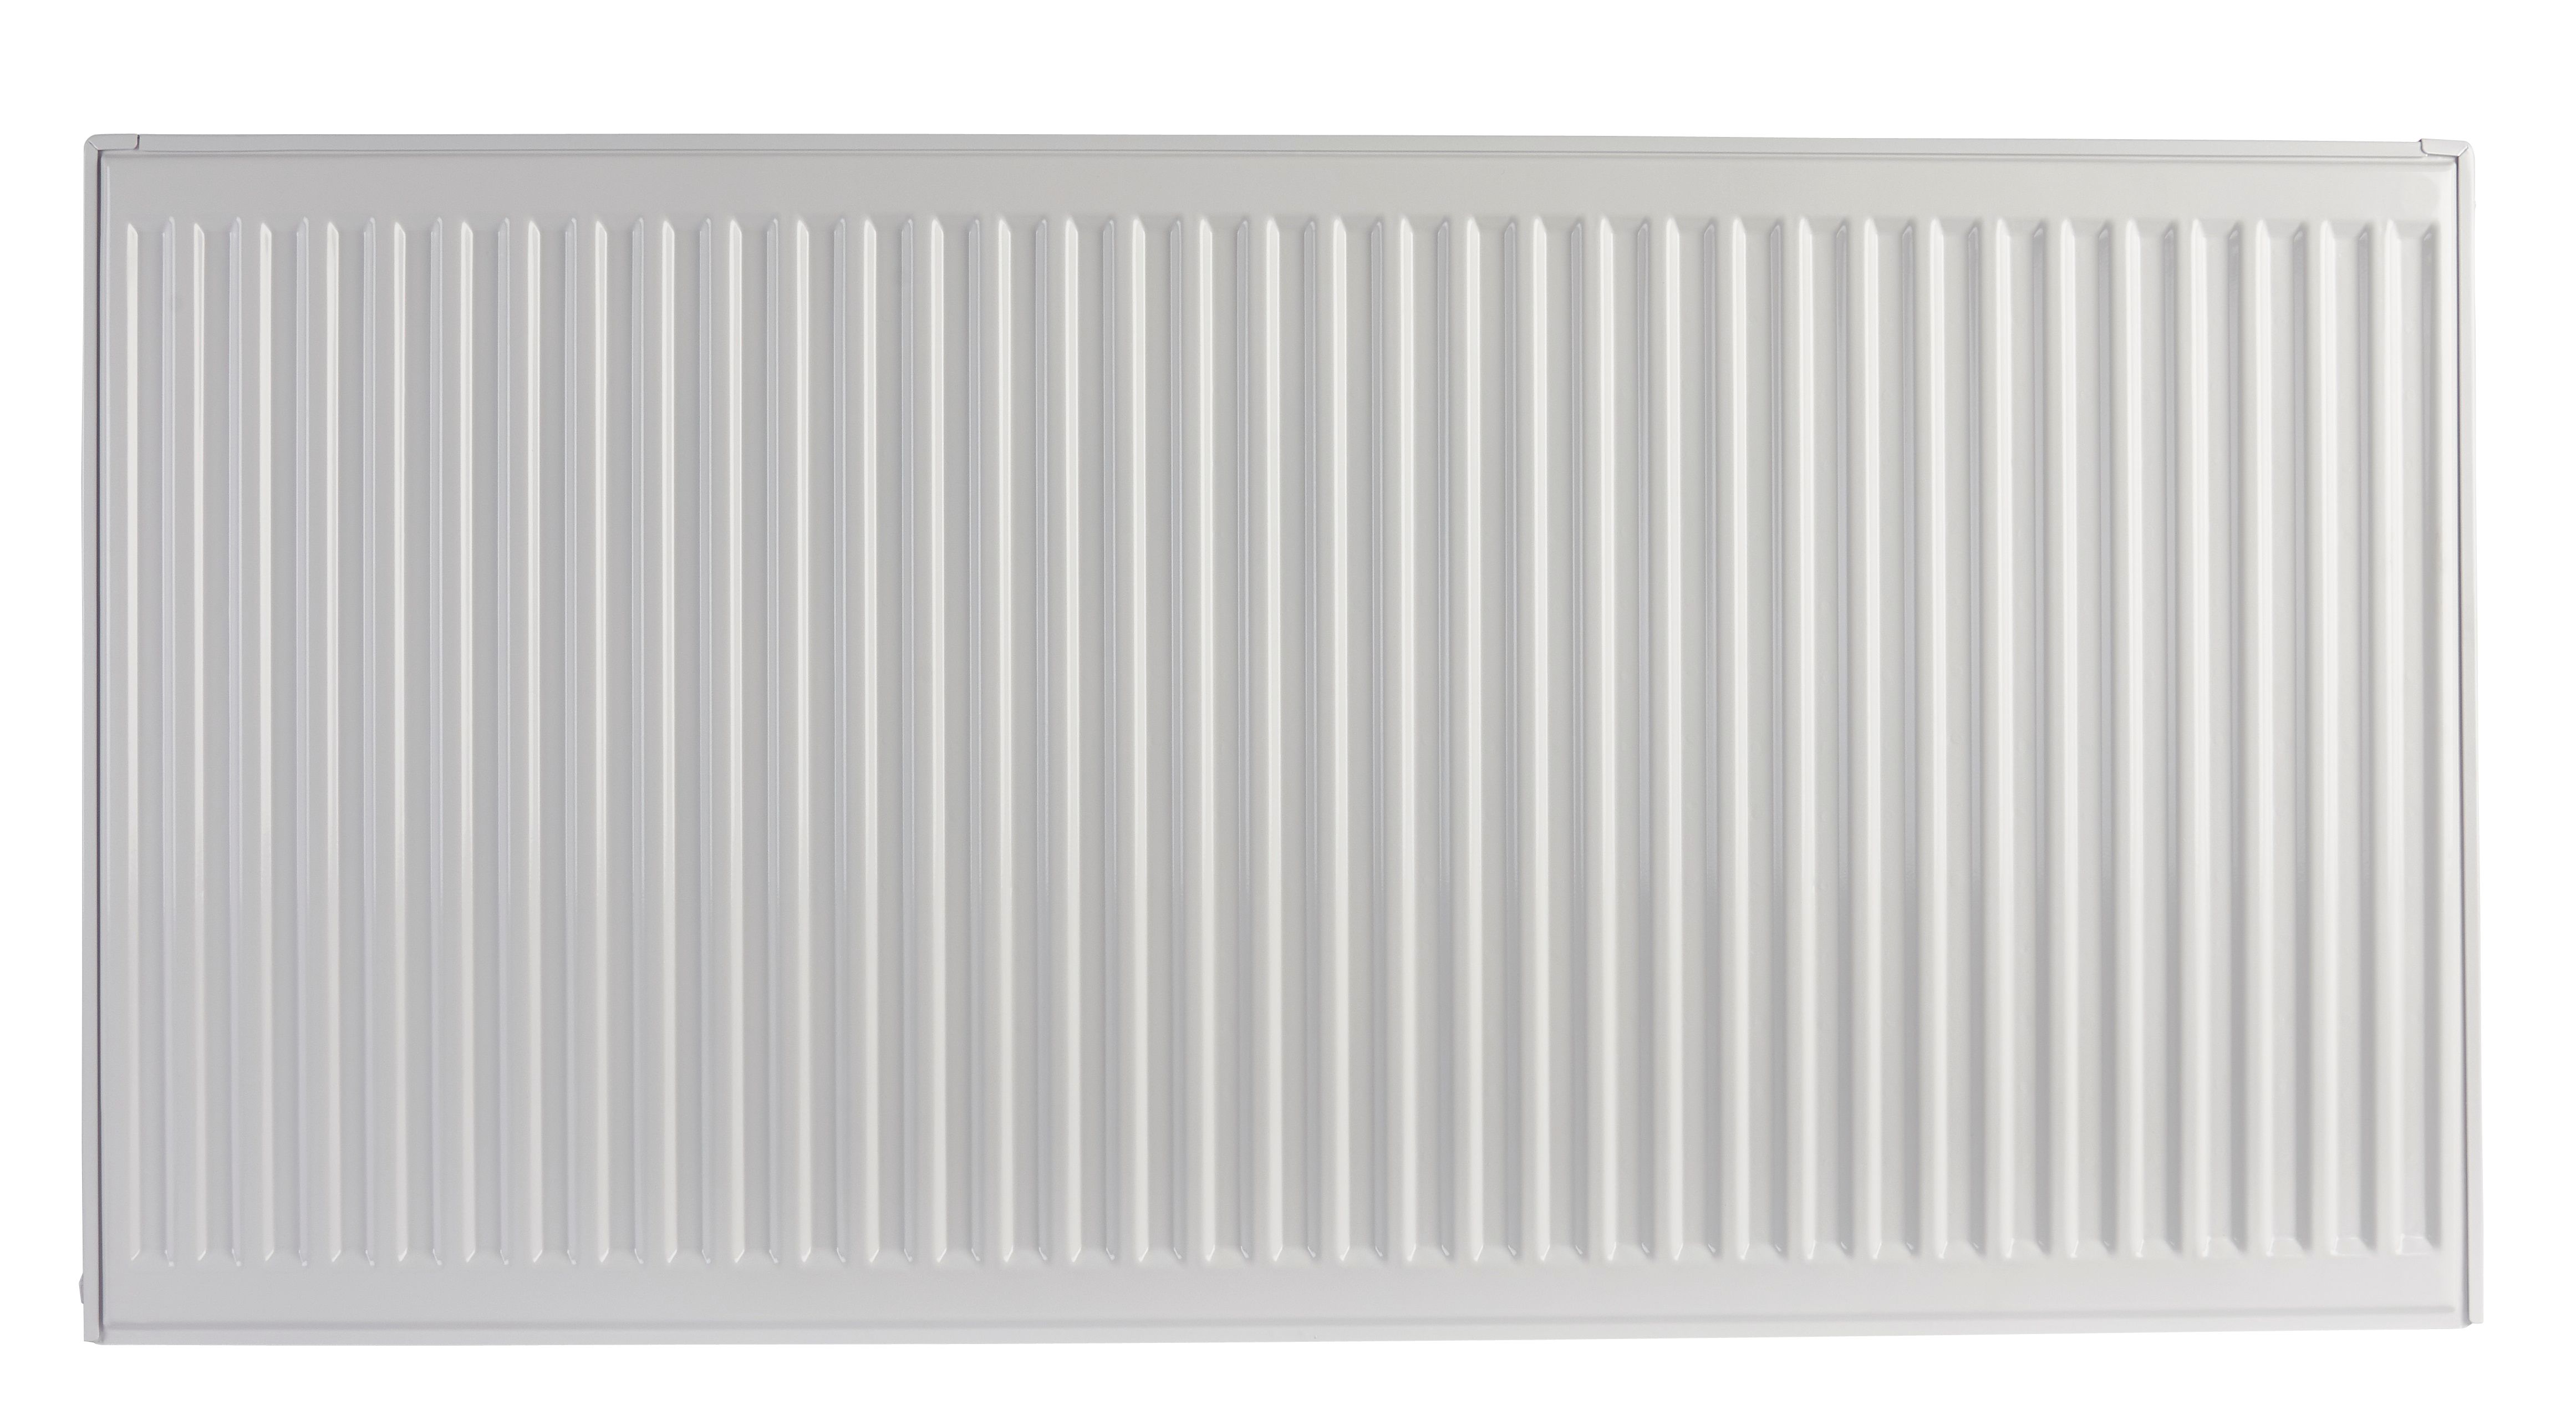 Image of Homeline by Stelrad 700 x 1100mm Type 21 Double Panel Plus Single Convector Radiator